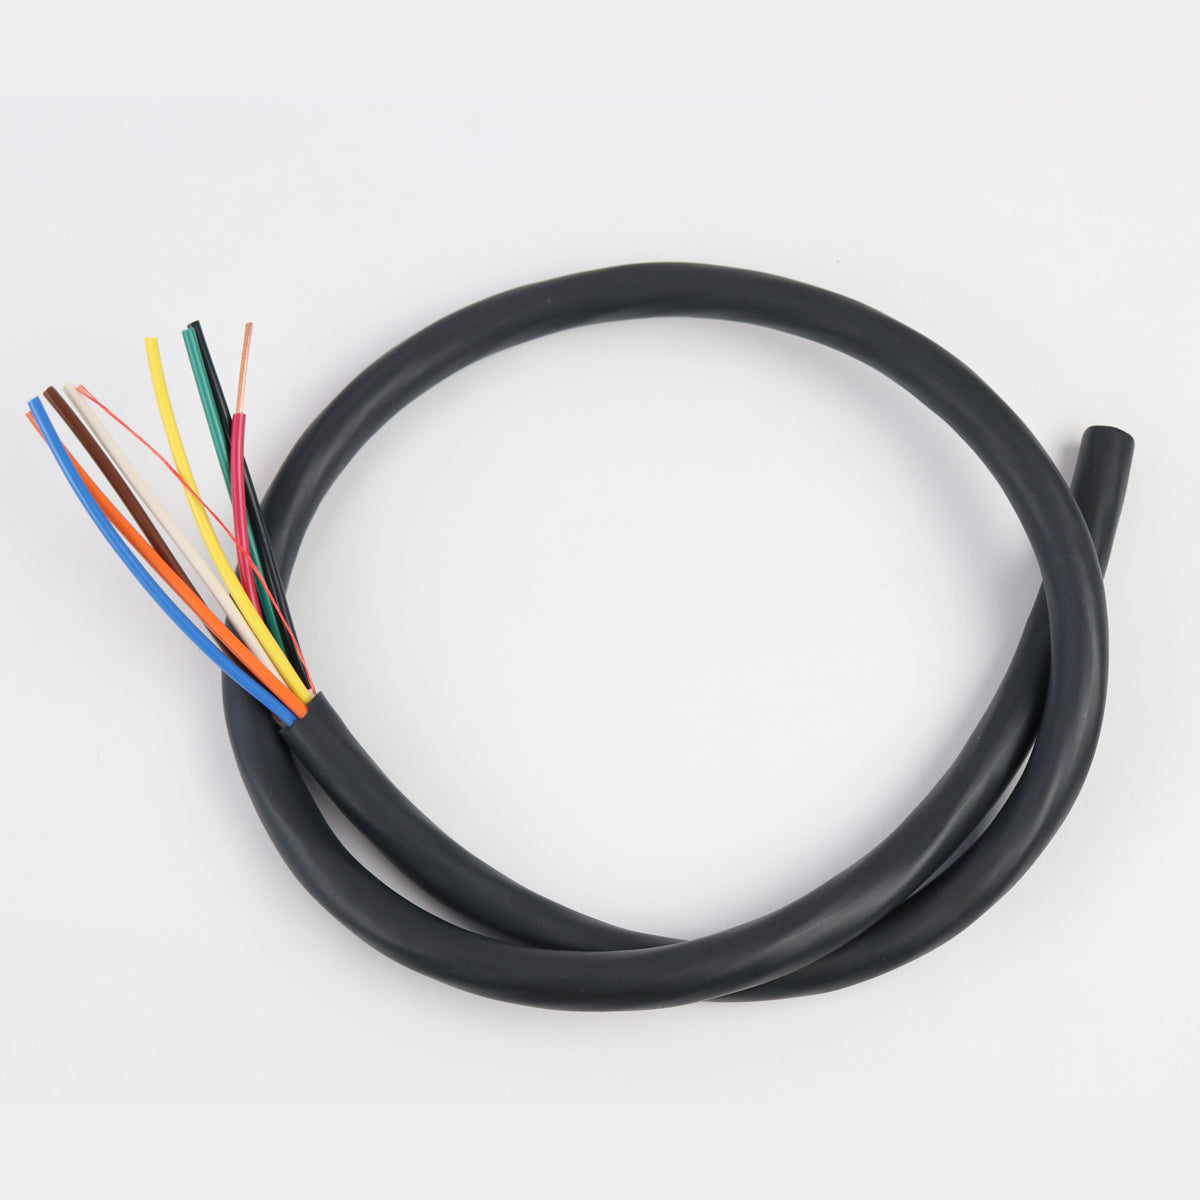 SEOOW Audio-Flex/Power Cable 14AWG 8 Conductor Bulk Cable